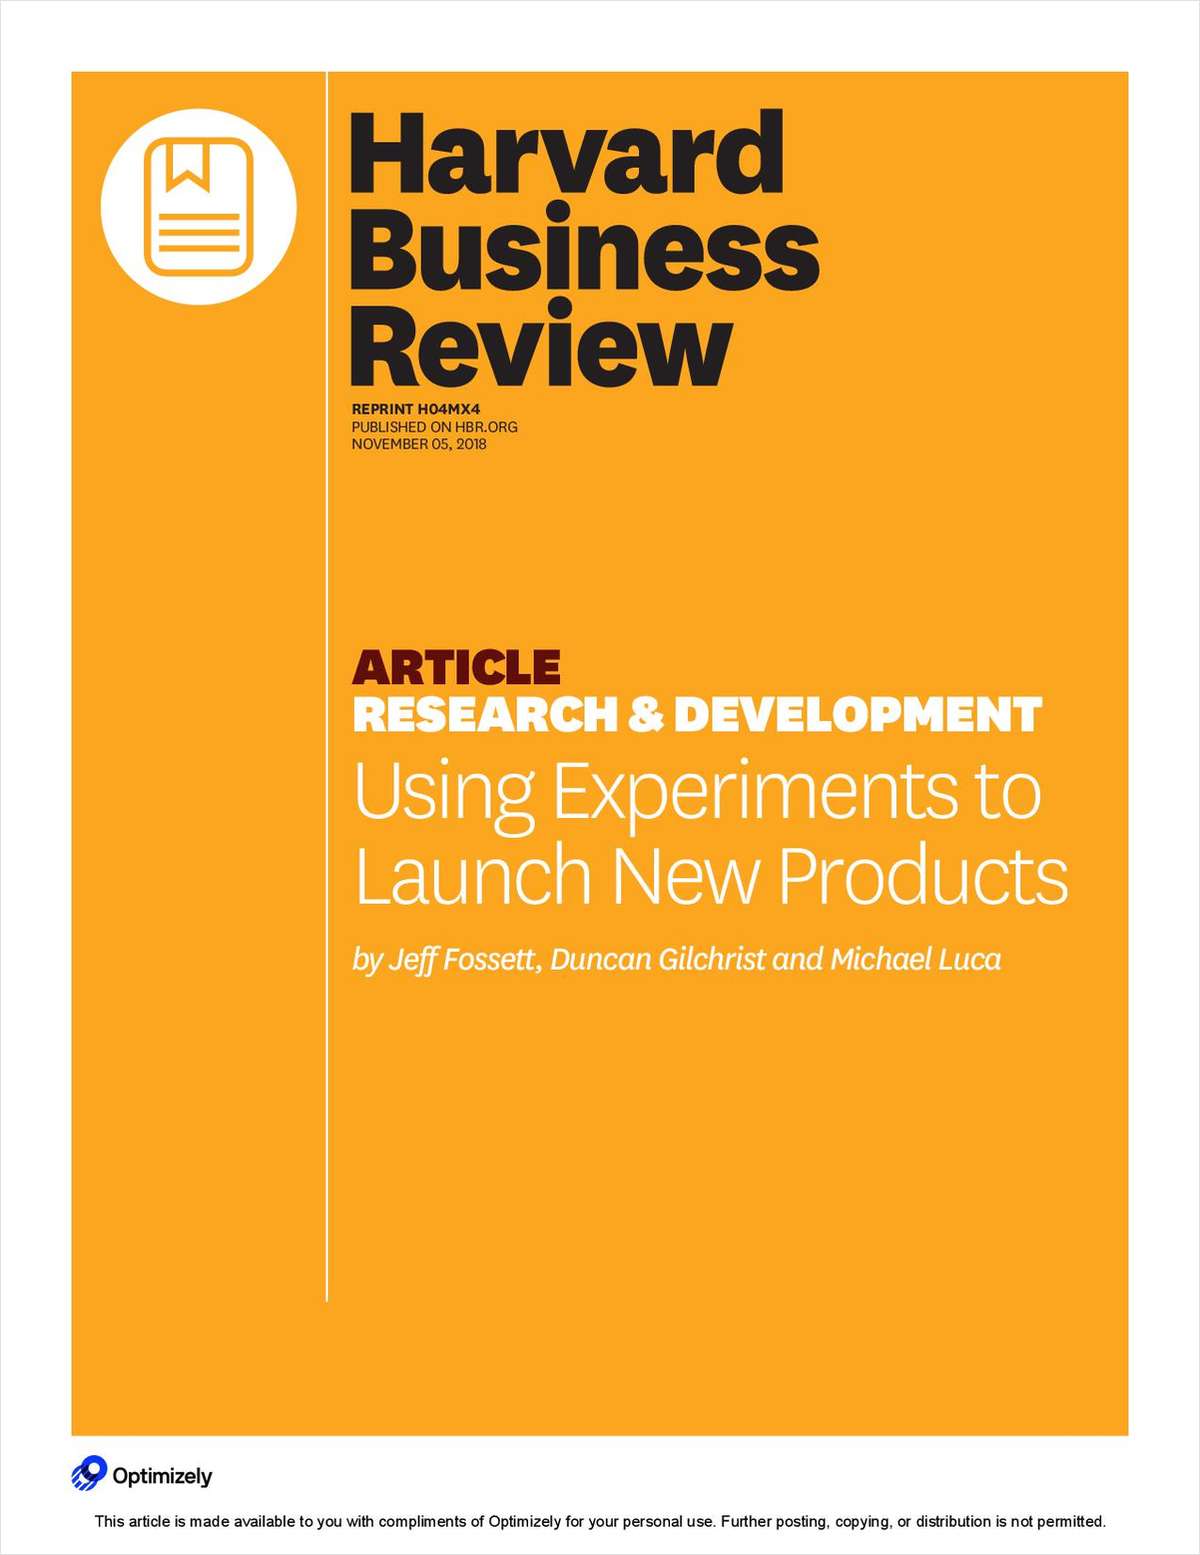 Harvard Business Review: Using Experiments to launch New Products